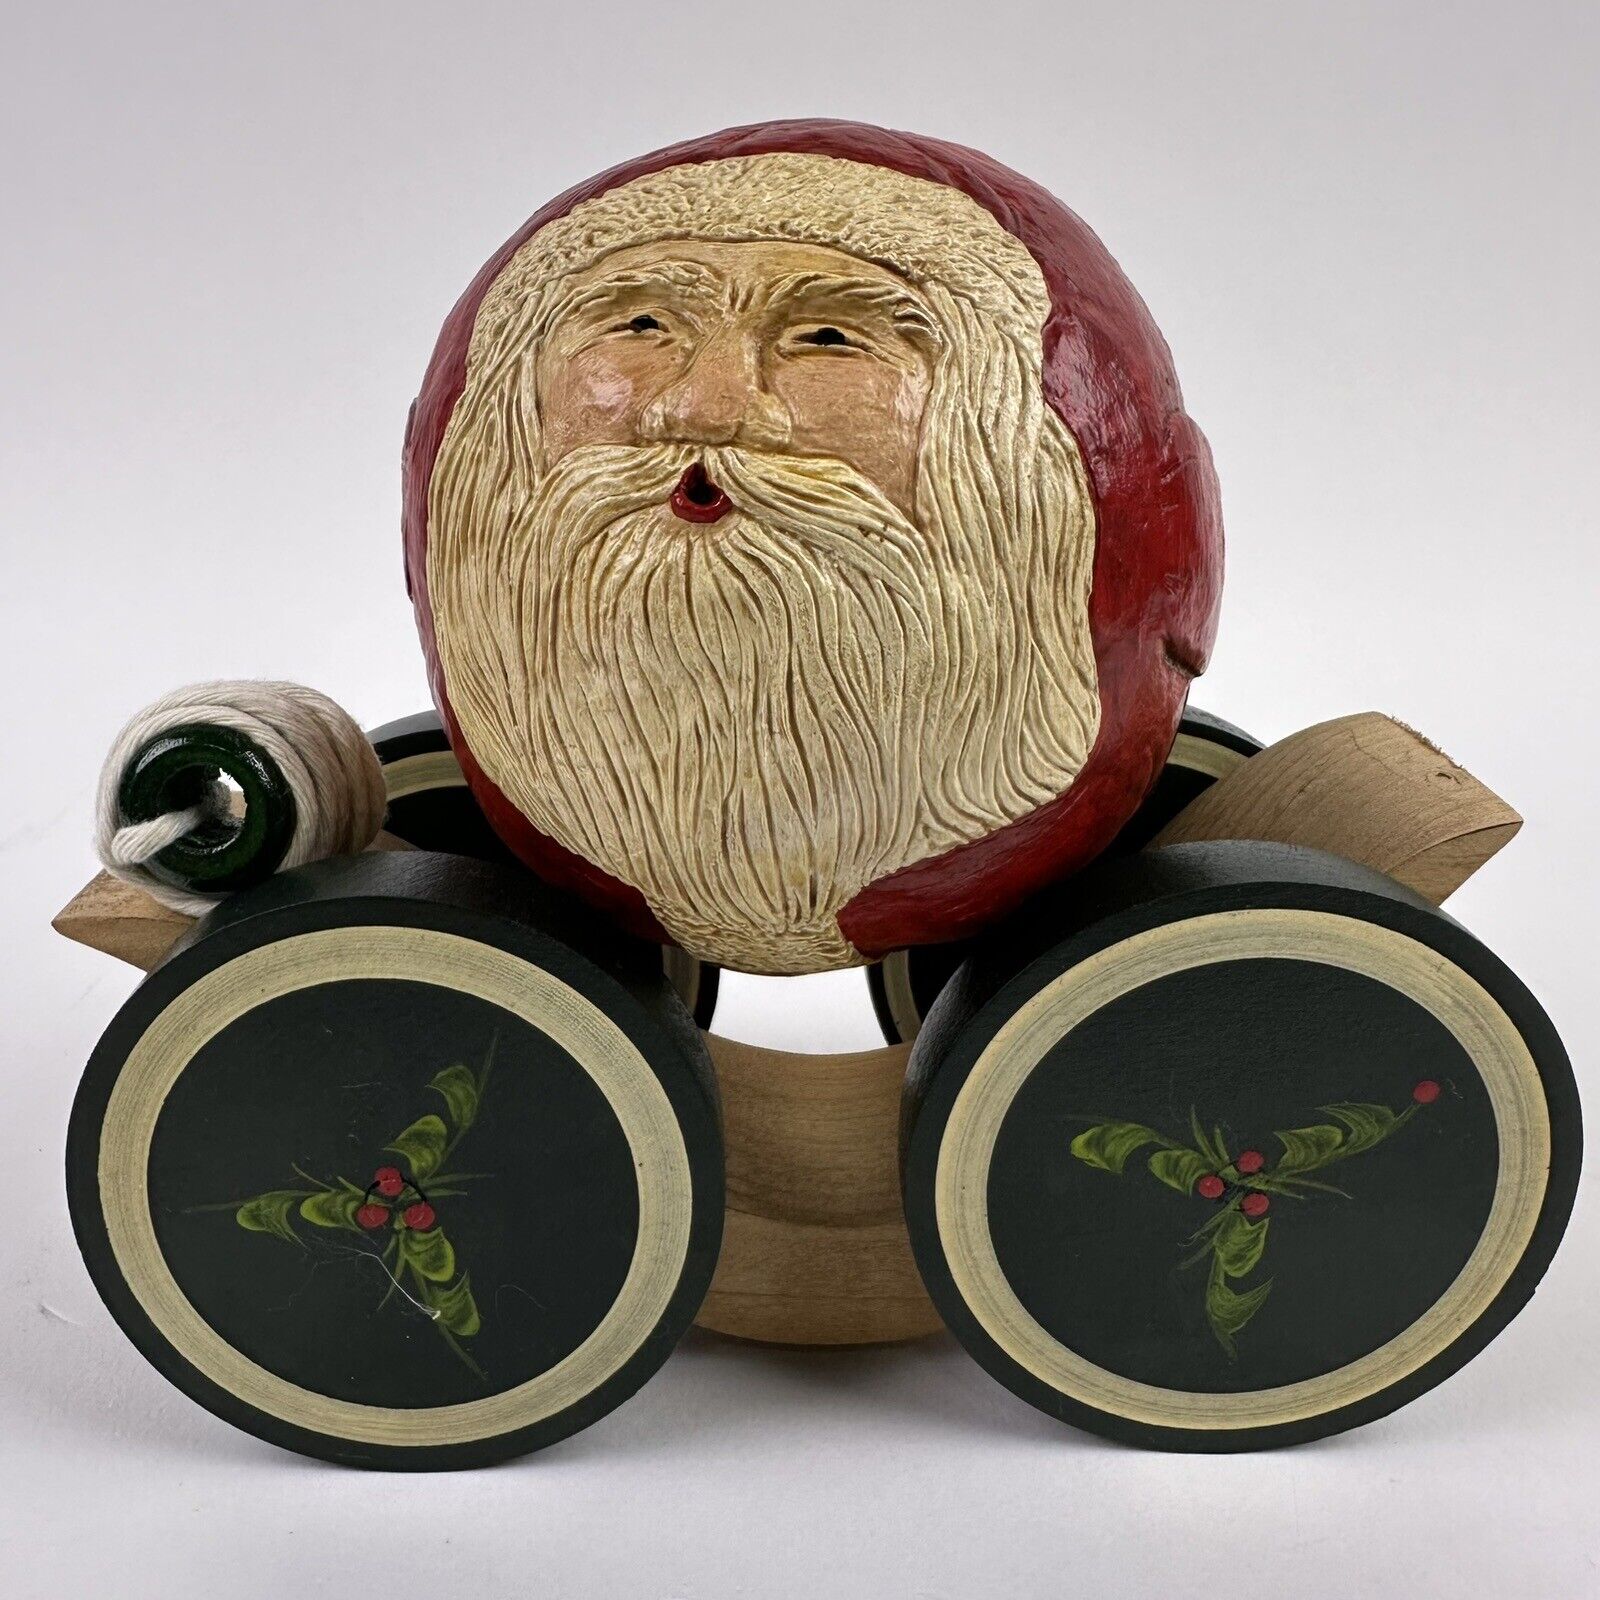 Briere Collectibles Roly Poly Santa Claus Pull Toy Wood Folk Art Signed 1986